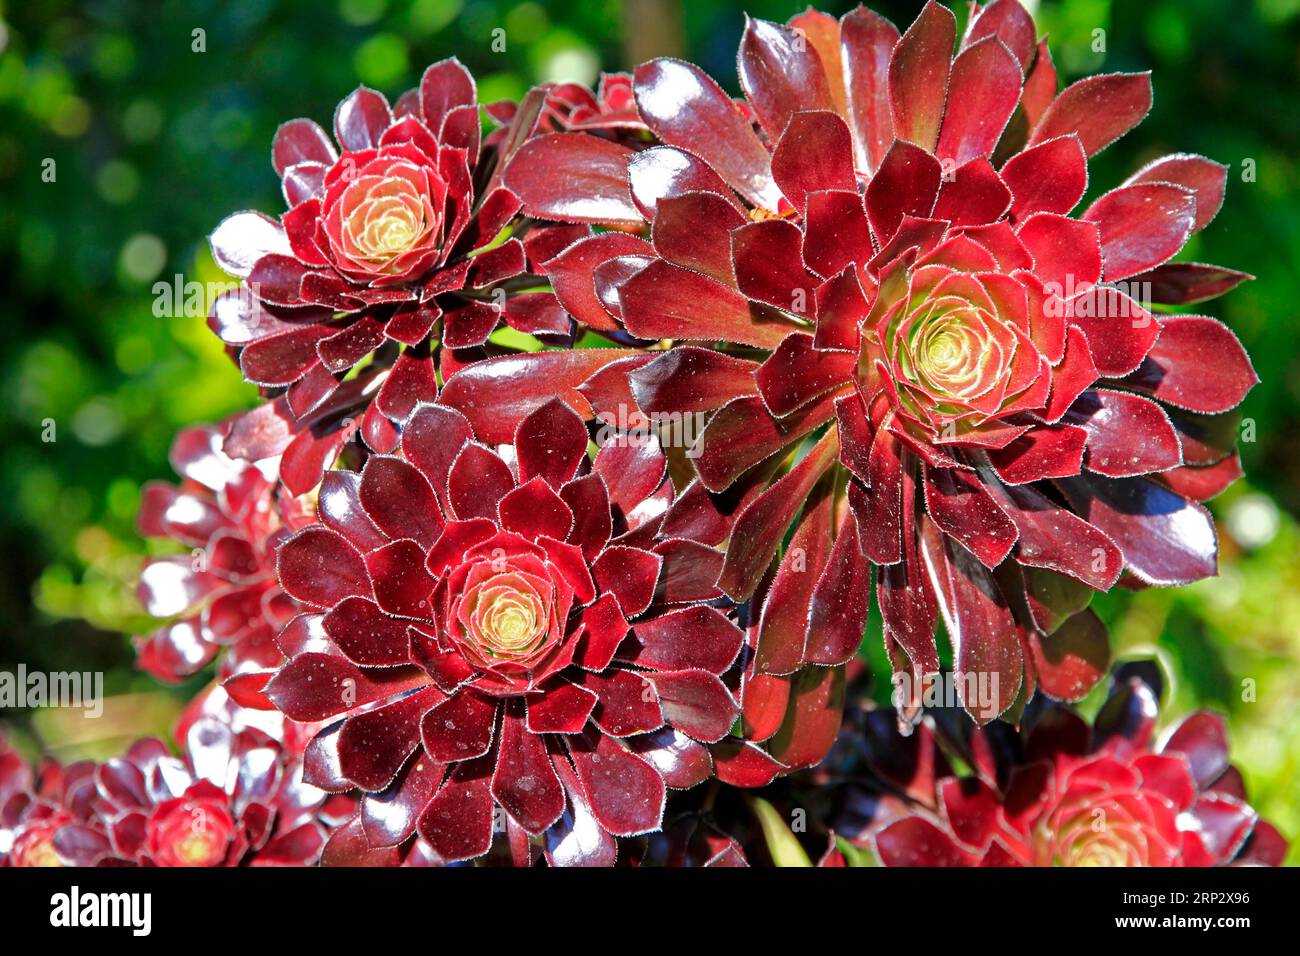 Thick-leaved plant (Aeonium) close-up, Blandys Garden, Funchal, Madeira Island Stock Photo